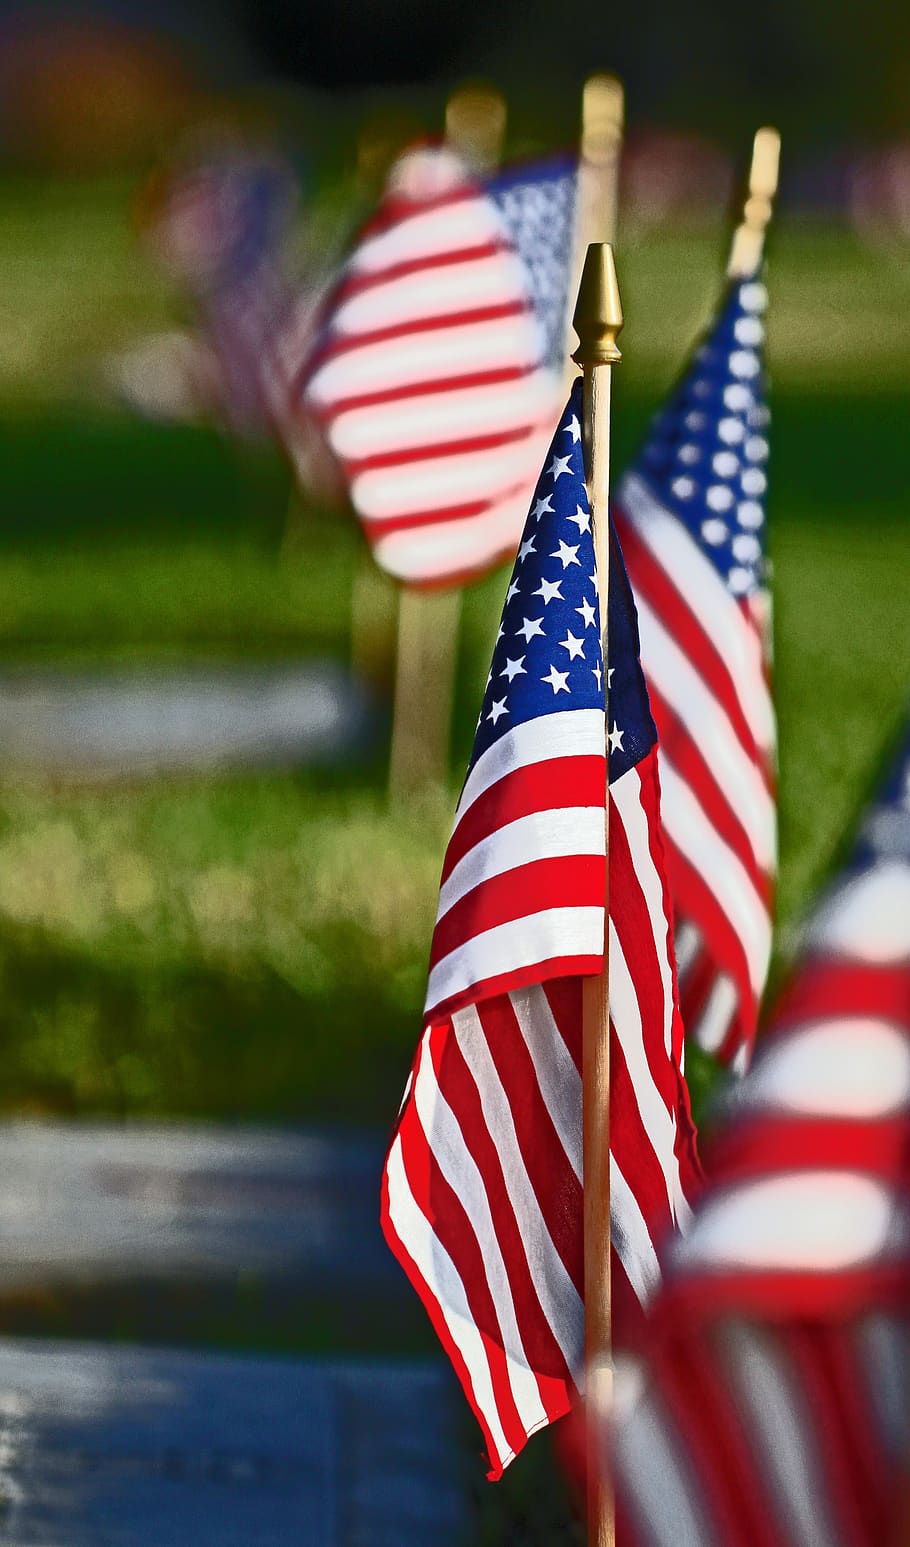 flag, red white and blue, stars and stripes, usa, america, patriotic, memorial, veterans, cemetery, honor